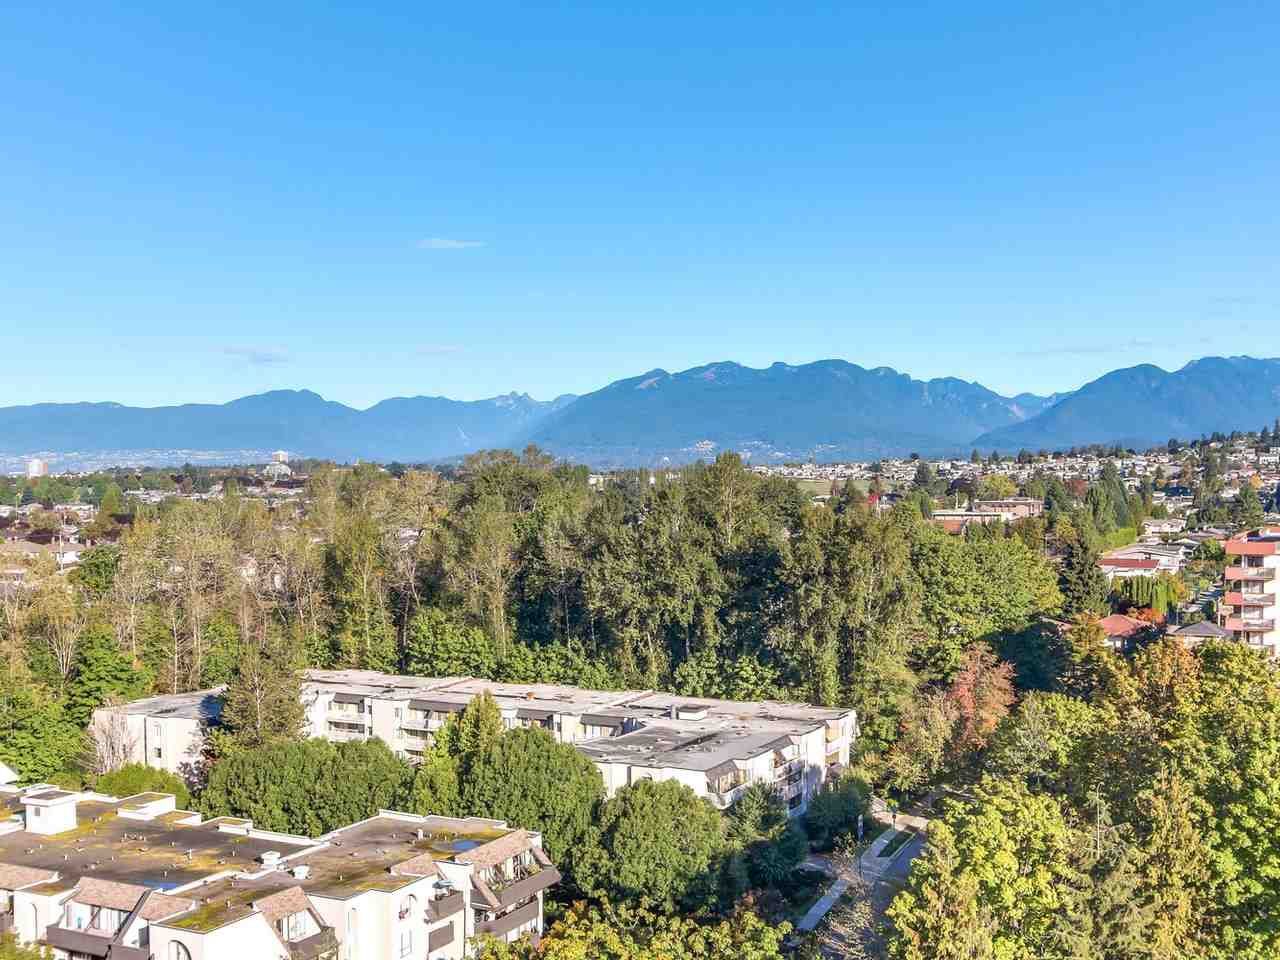 Main Photo: 2102 2041 BELLWOOD AVENUE in Burnaby: Brentwood Park Condo for sale (Burnaby North)  : MLS®# R2212223